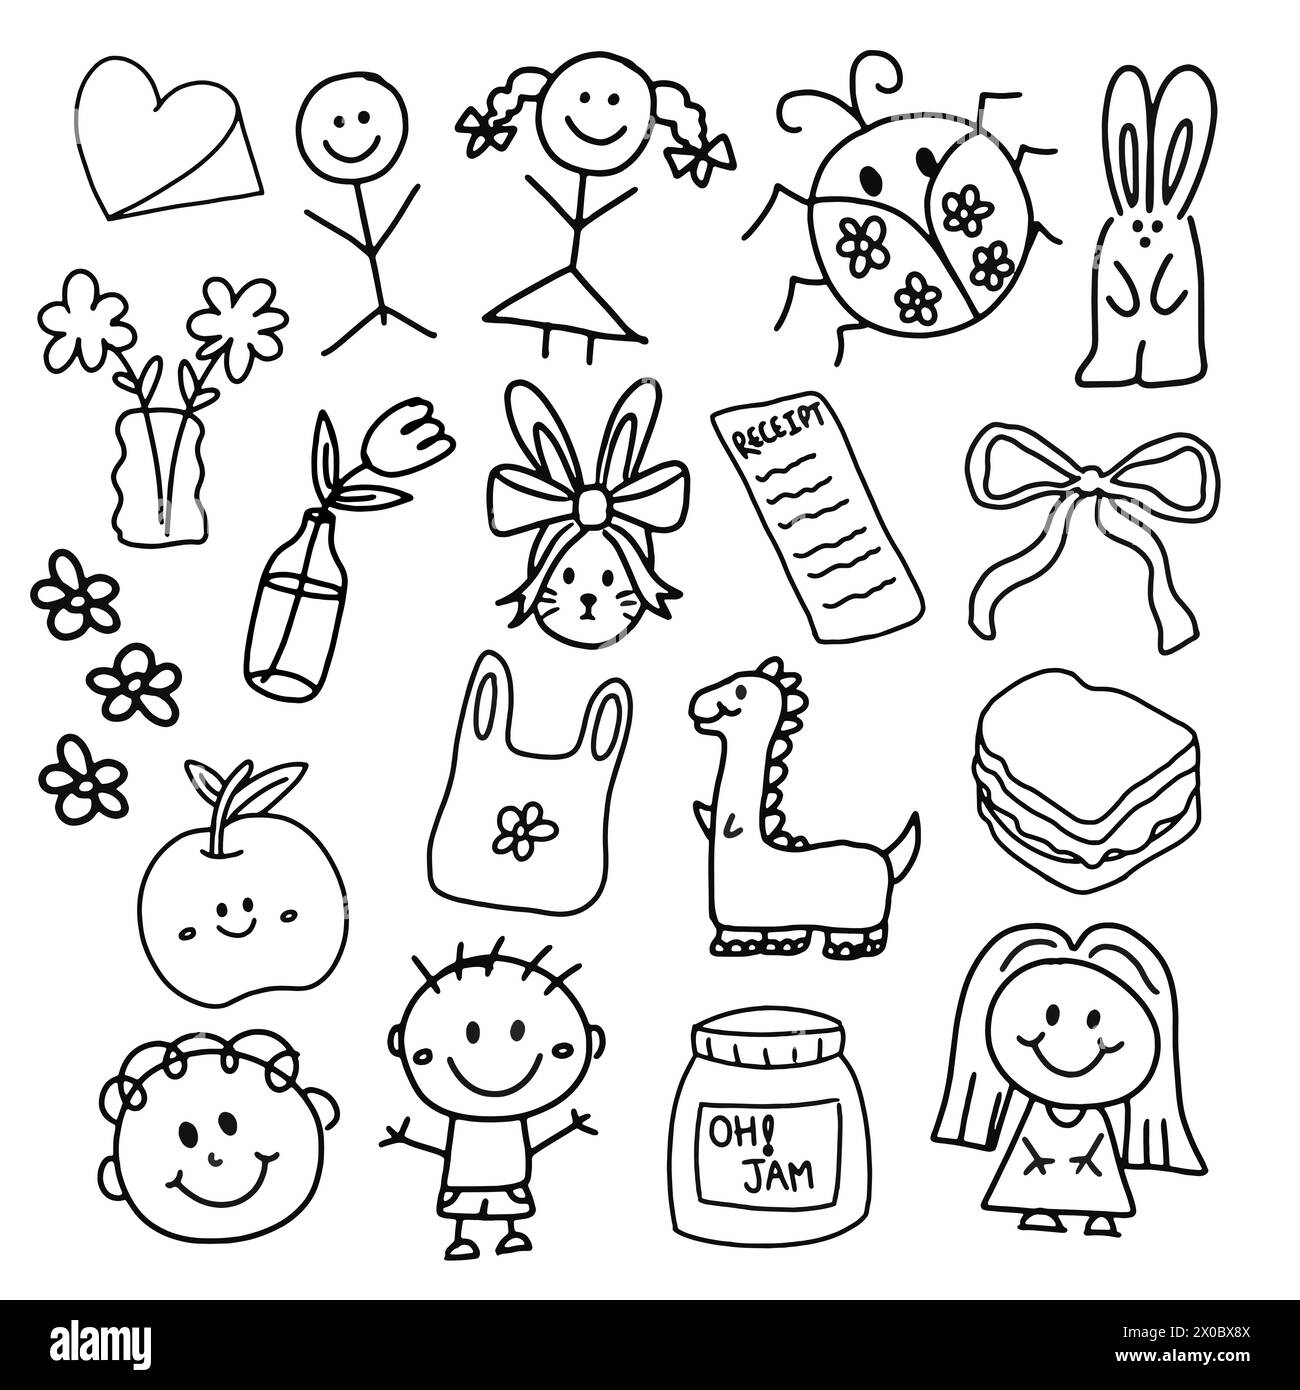 Outlines of hand drawn cute elements such as flower vase, ladybug, children, sandwich, ribbon, apple, dinosaur, jam, heart, bunny for colouring book Stock Vector